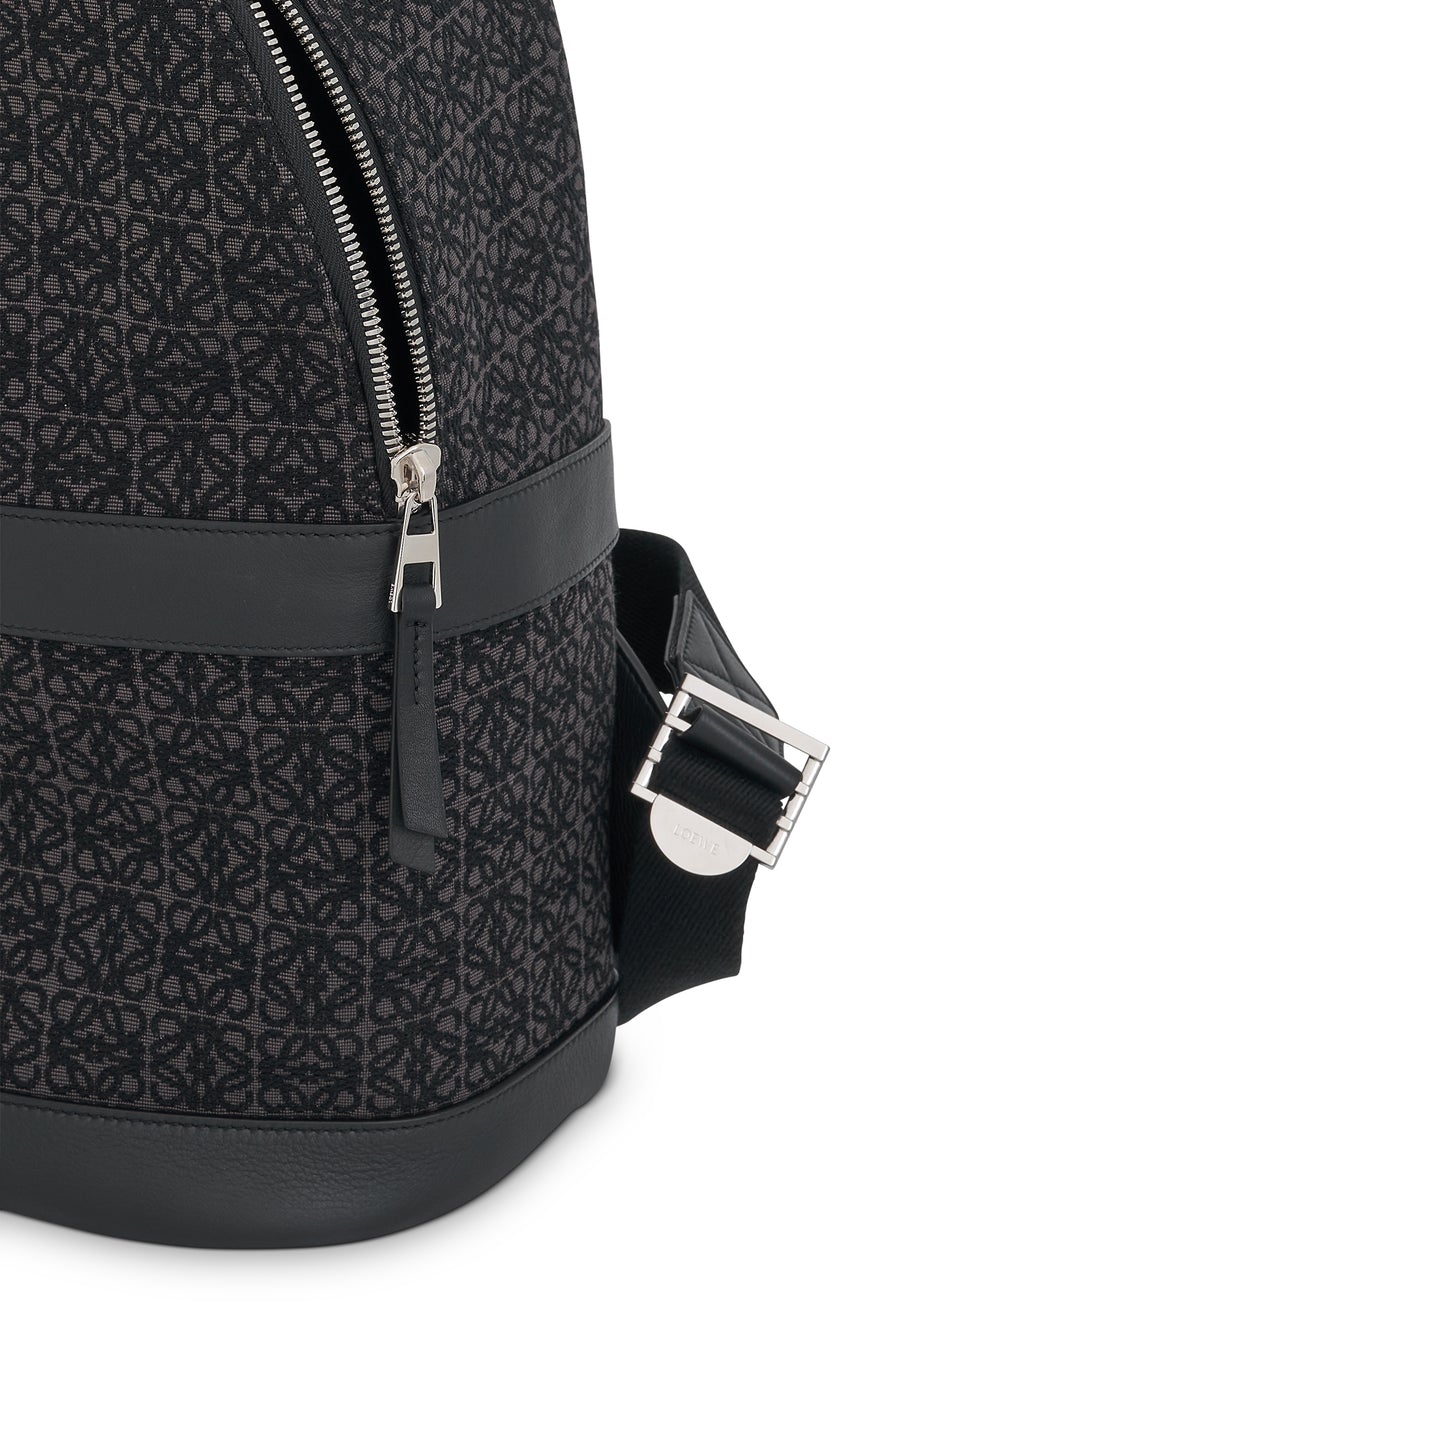 Round Backpack in Anagram Jacquard and Calfskin in Anthracite